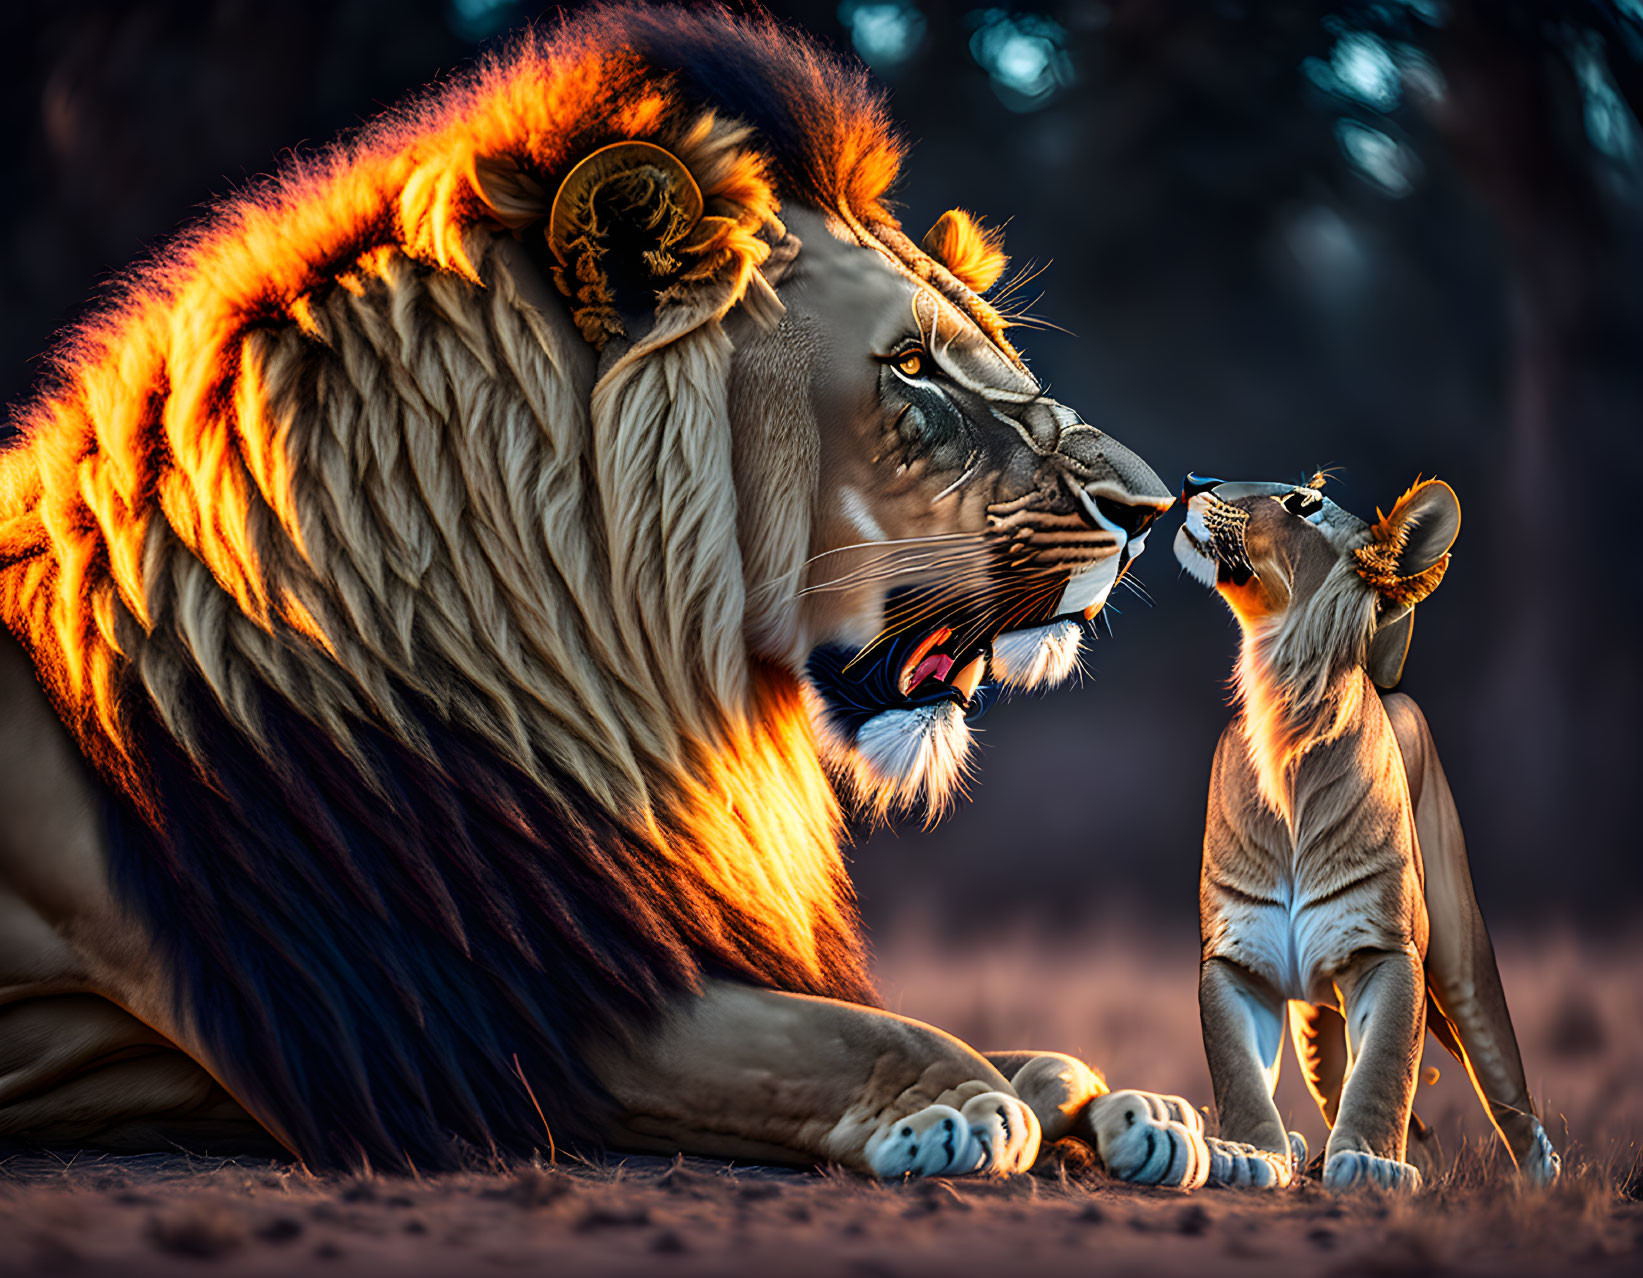 Majestic lion and cub touching noses in warm dusk light